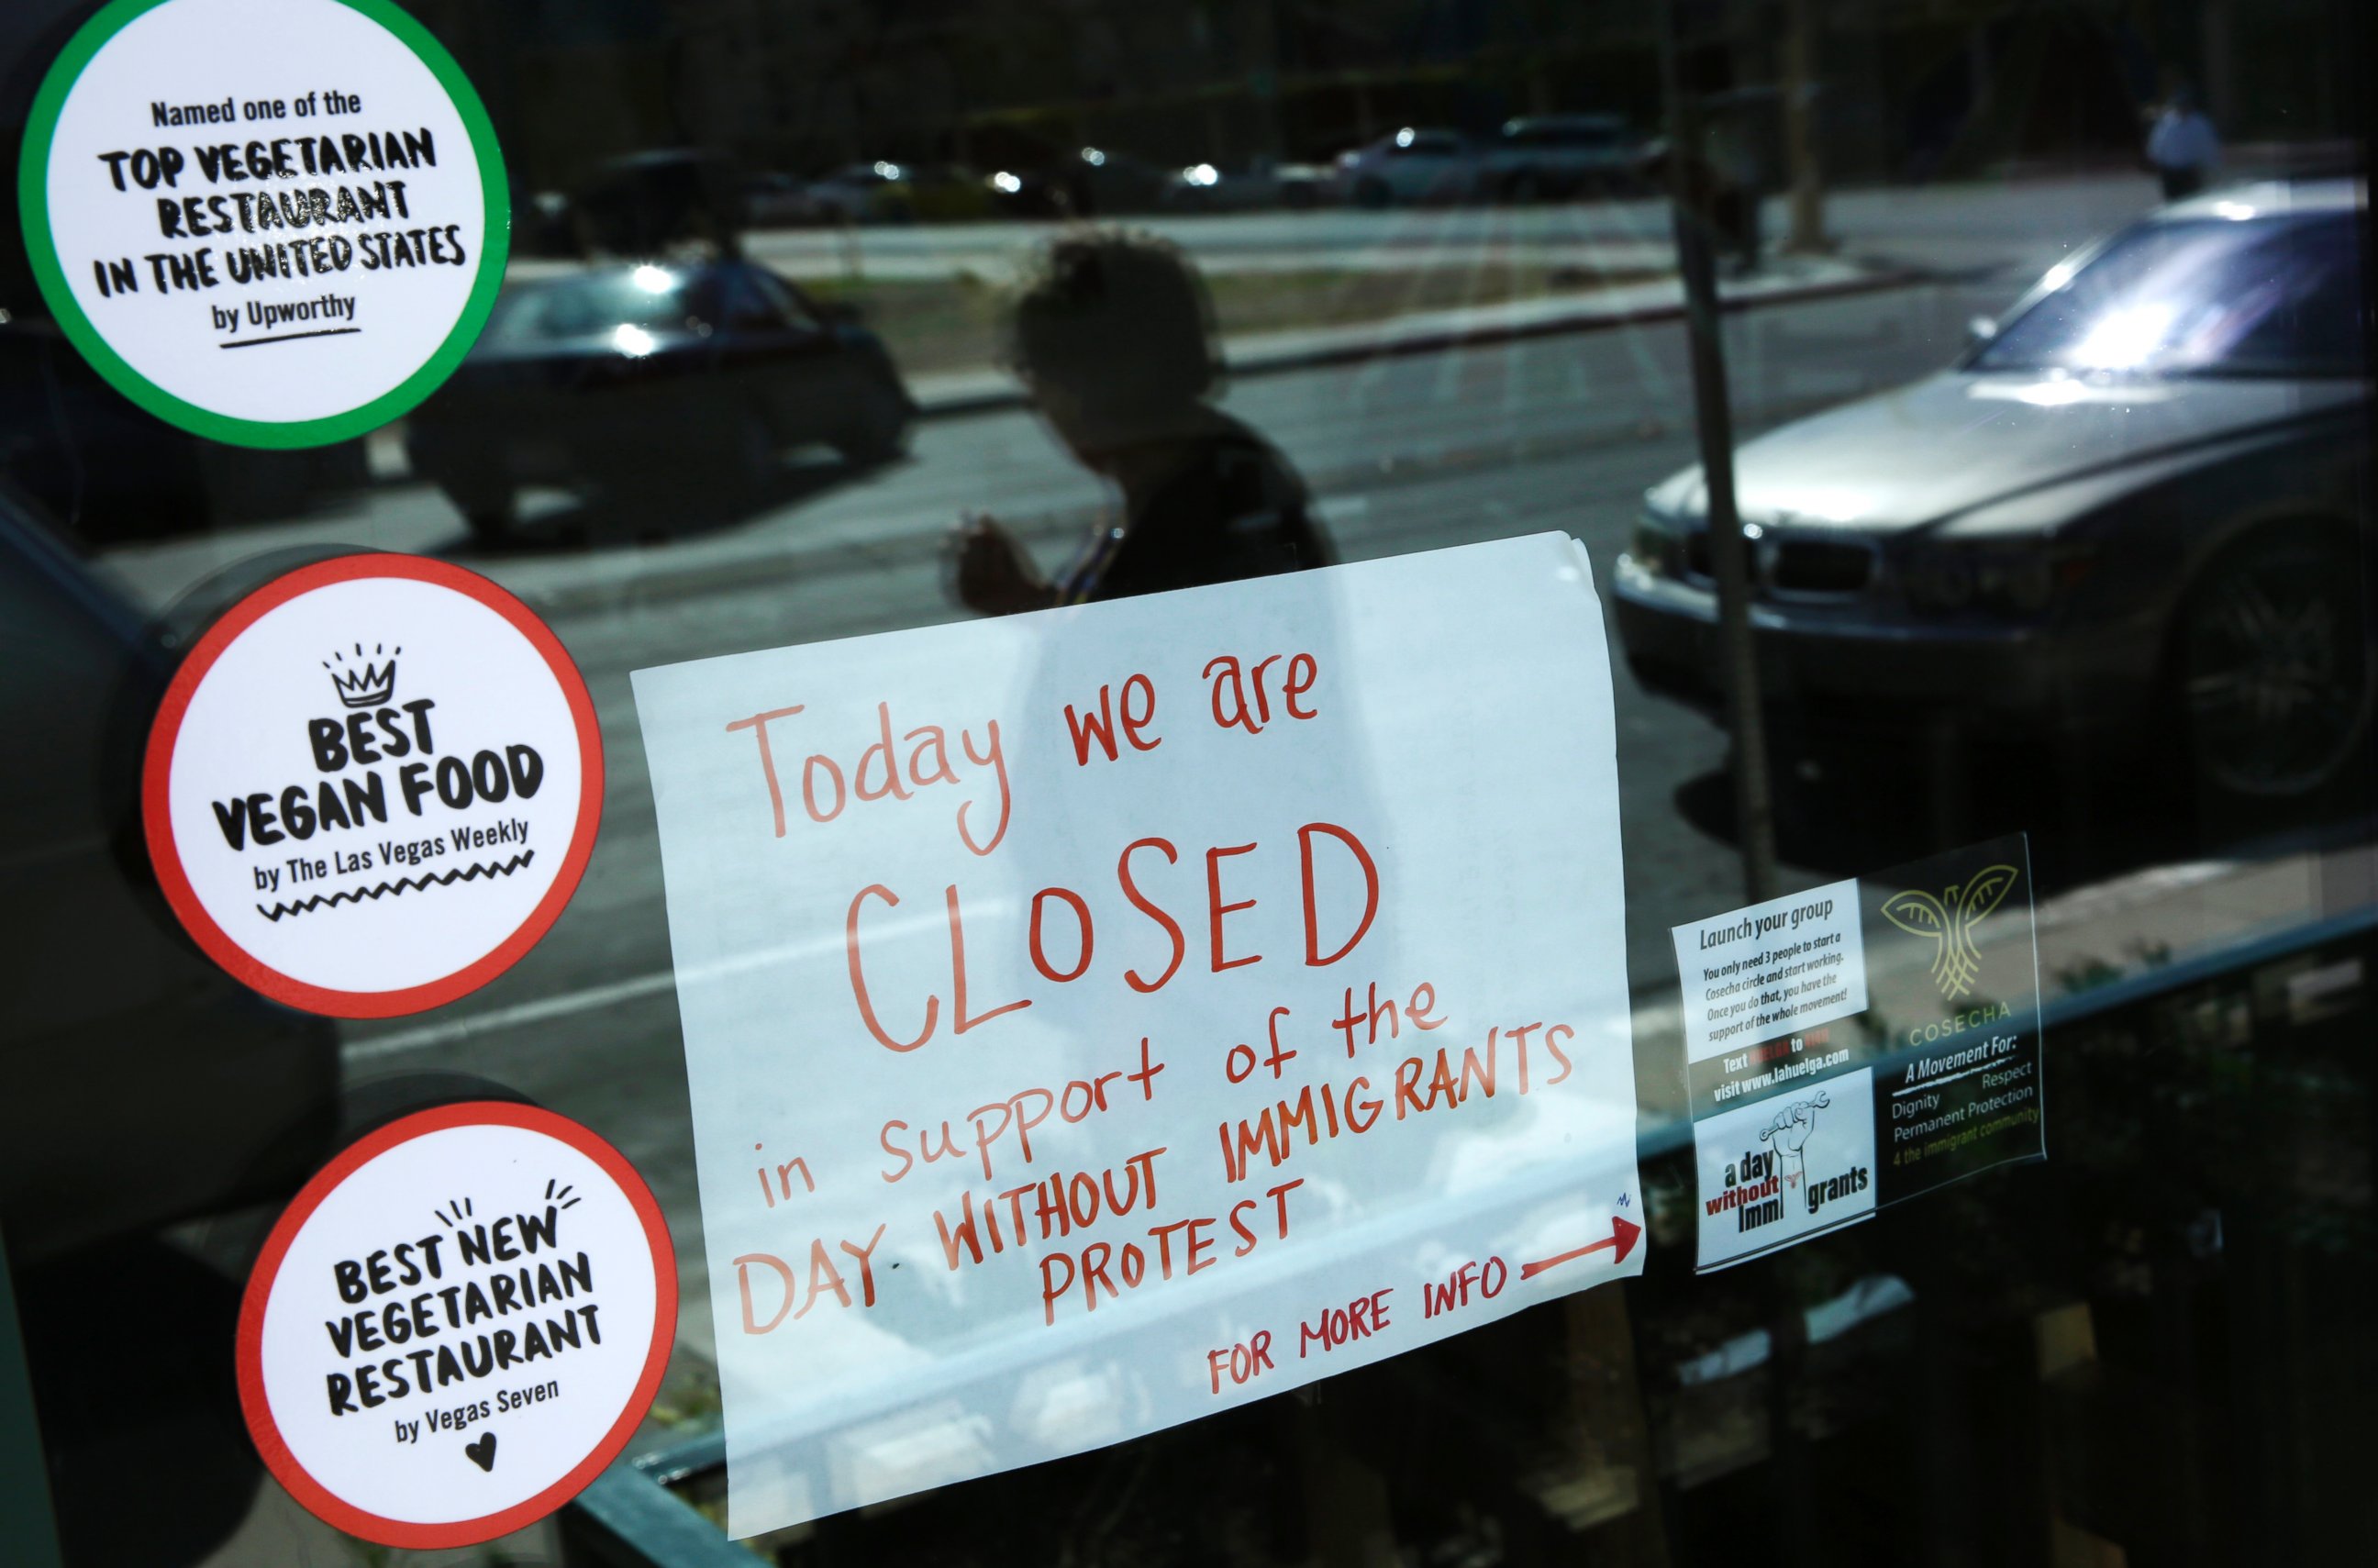 PHOTO: A sign alerts customers that restaurant VegeNation is closed in support of the Day Without Immigrants protest, Feb. 16, 2017, in Las Vegas. 